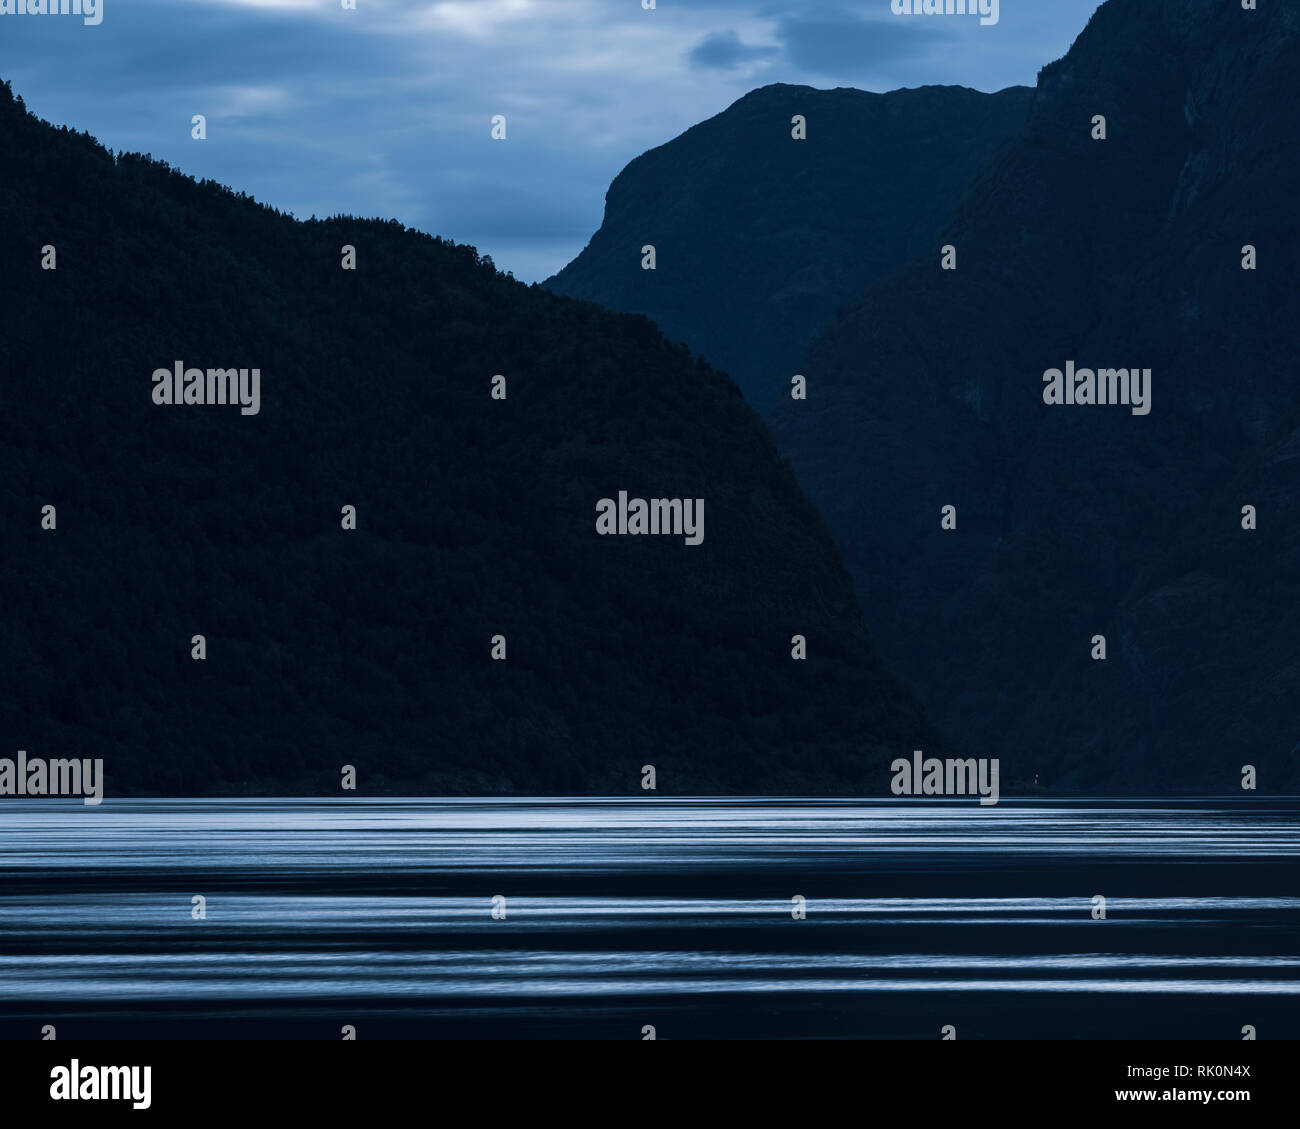 Outline of mountains across fjord at dusk, Aurland, Norway, Europe Stock Photo